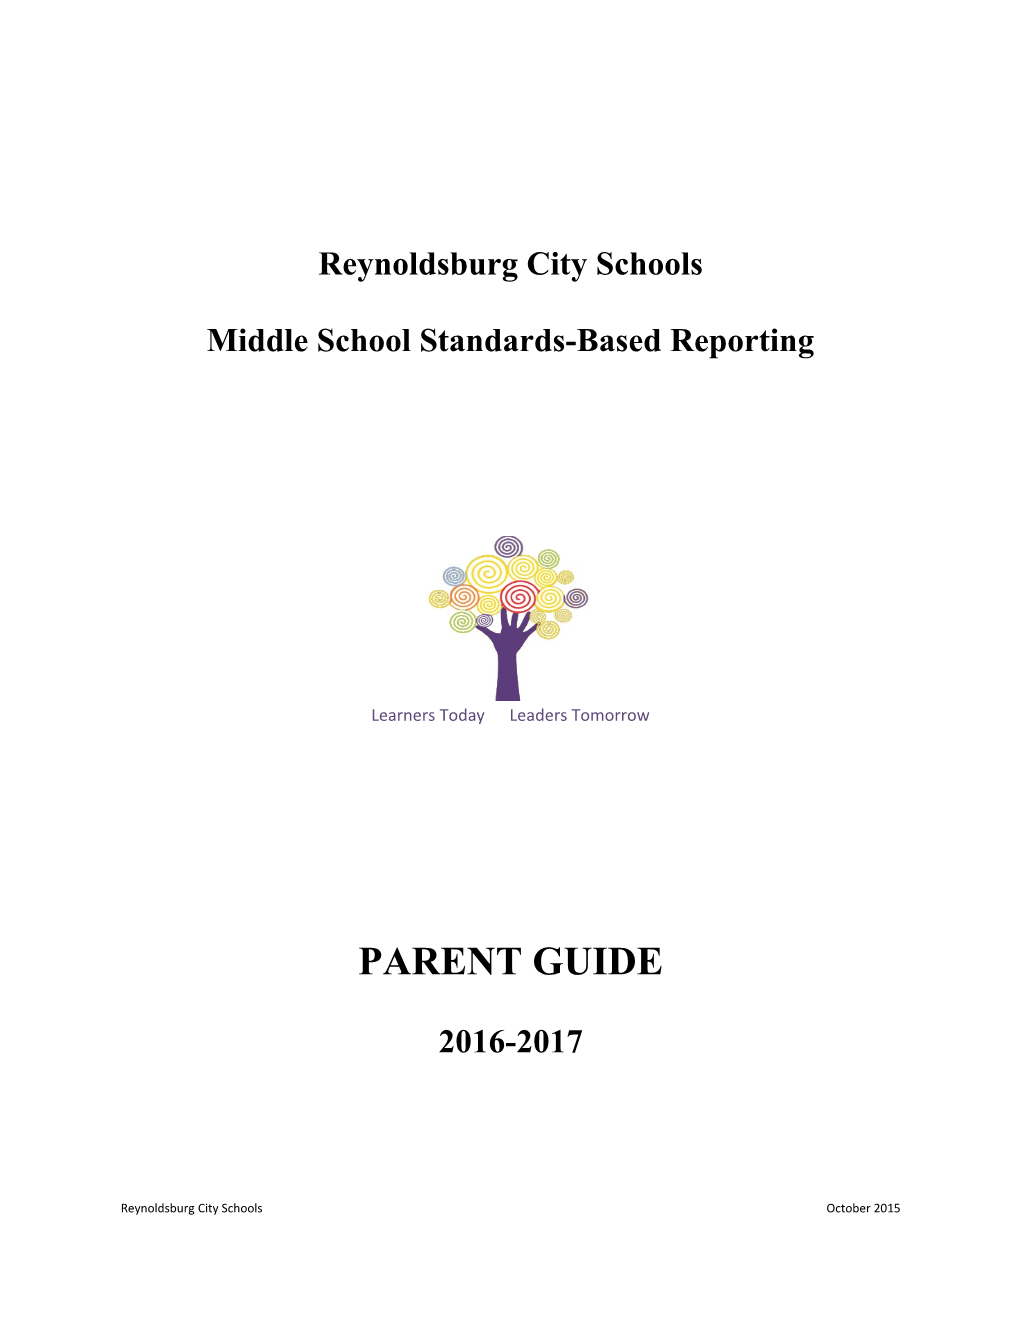 Middle School Standards-Based Reporting